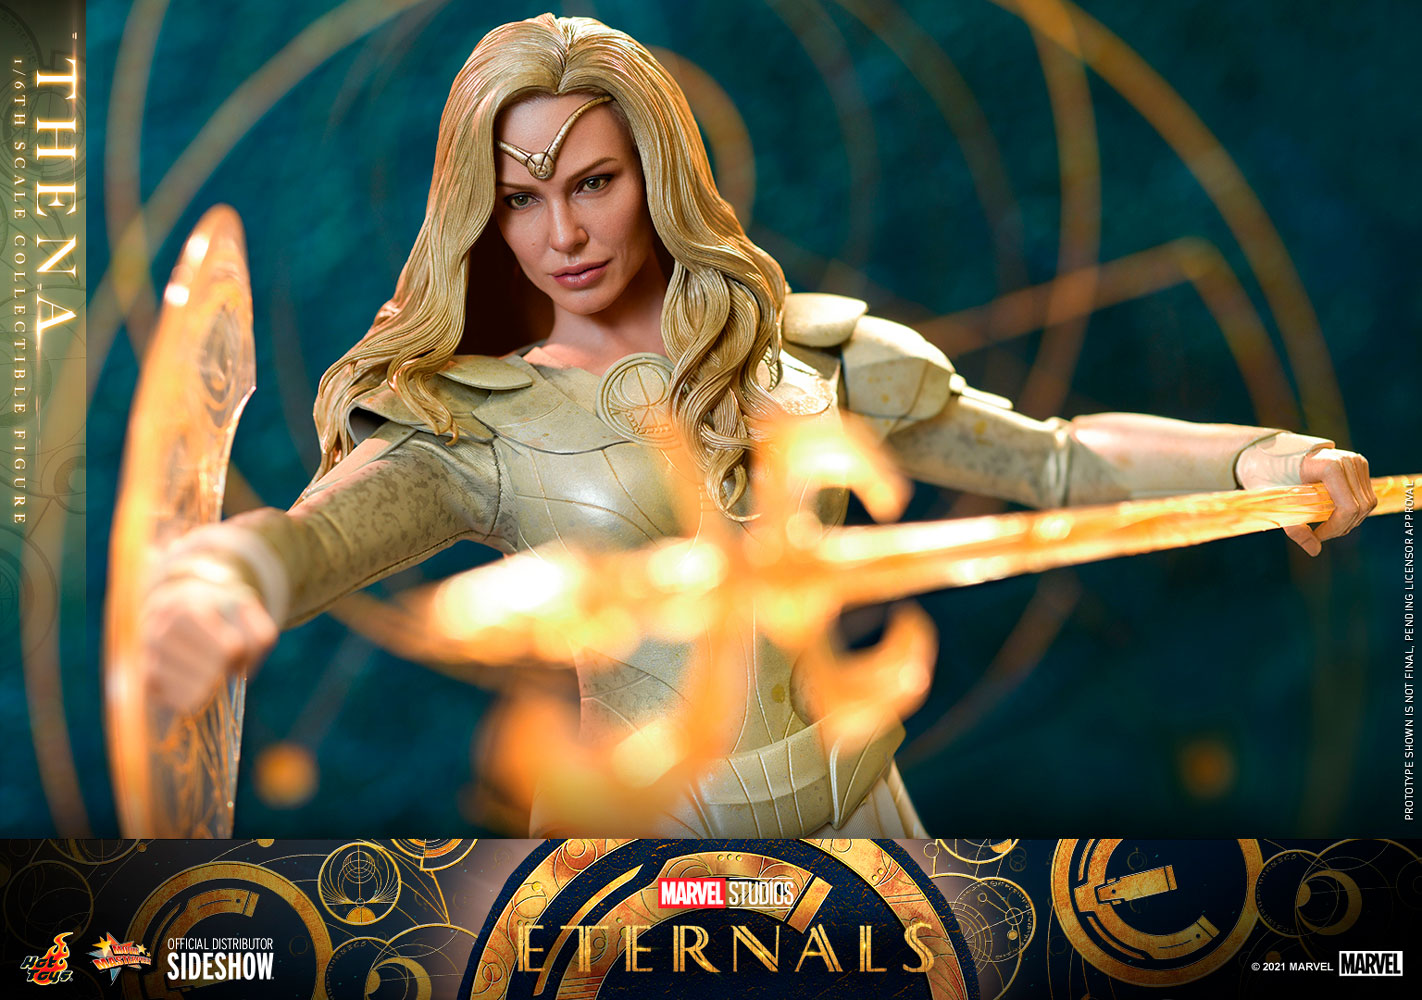 Hot Toys Eternals Thena